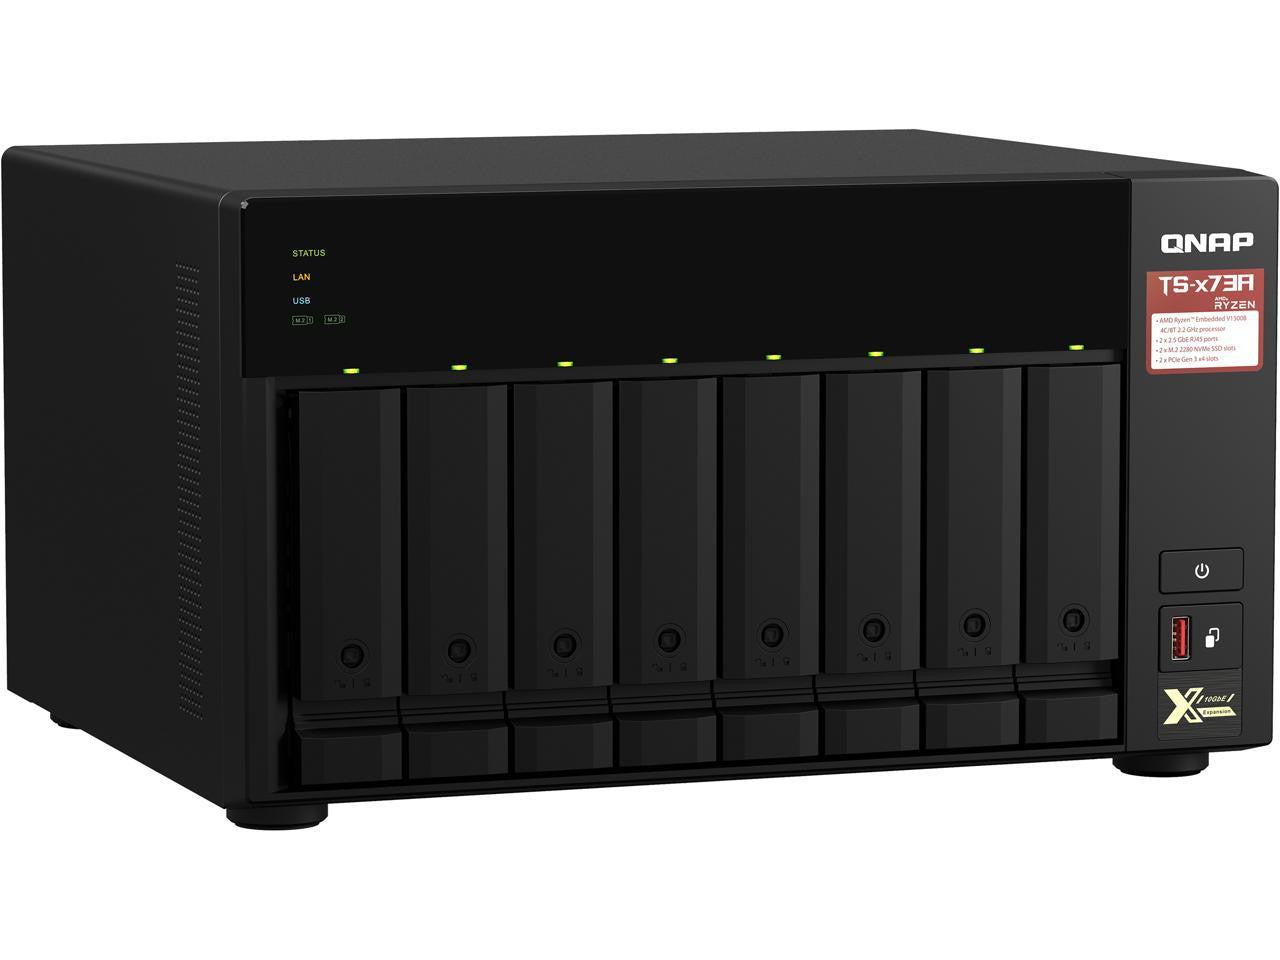 QNAP TS-873A 8-BAY NAS with 16GB DDR4 RAM and 32TB (8x4TB) Western Digital RED PLUS Drives Fully Assembled and Tested